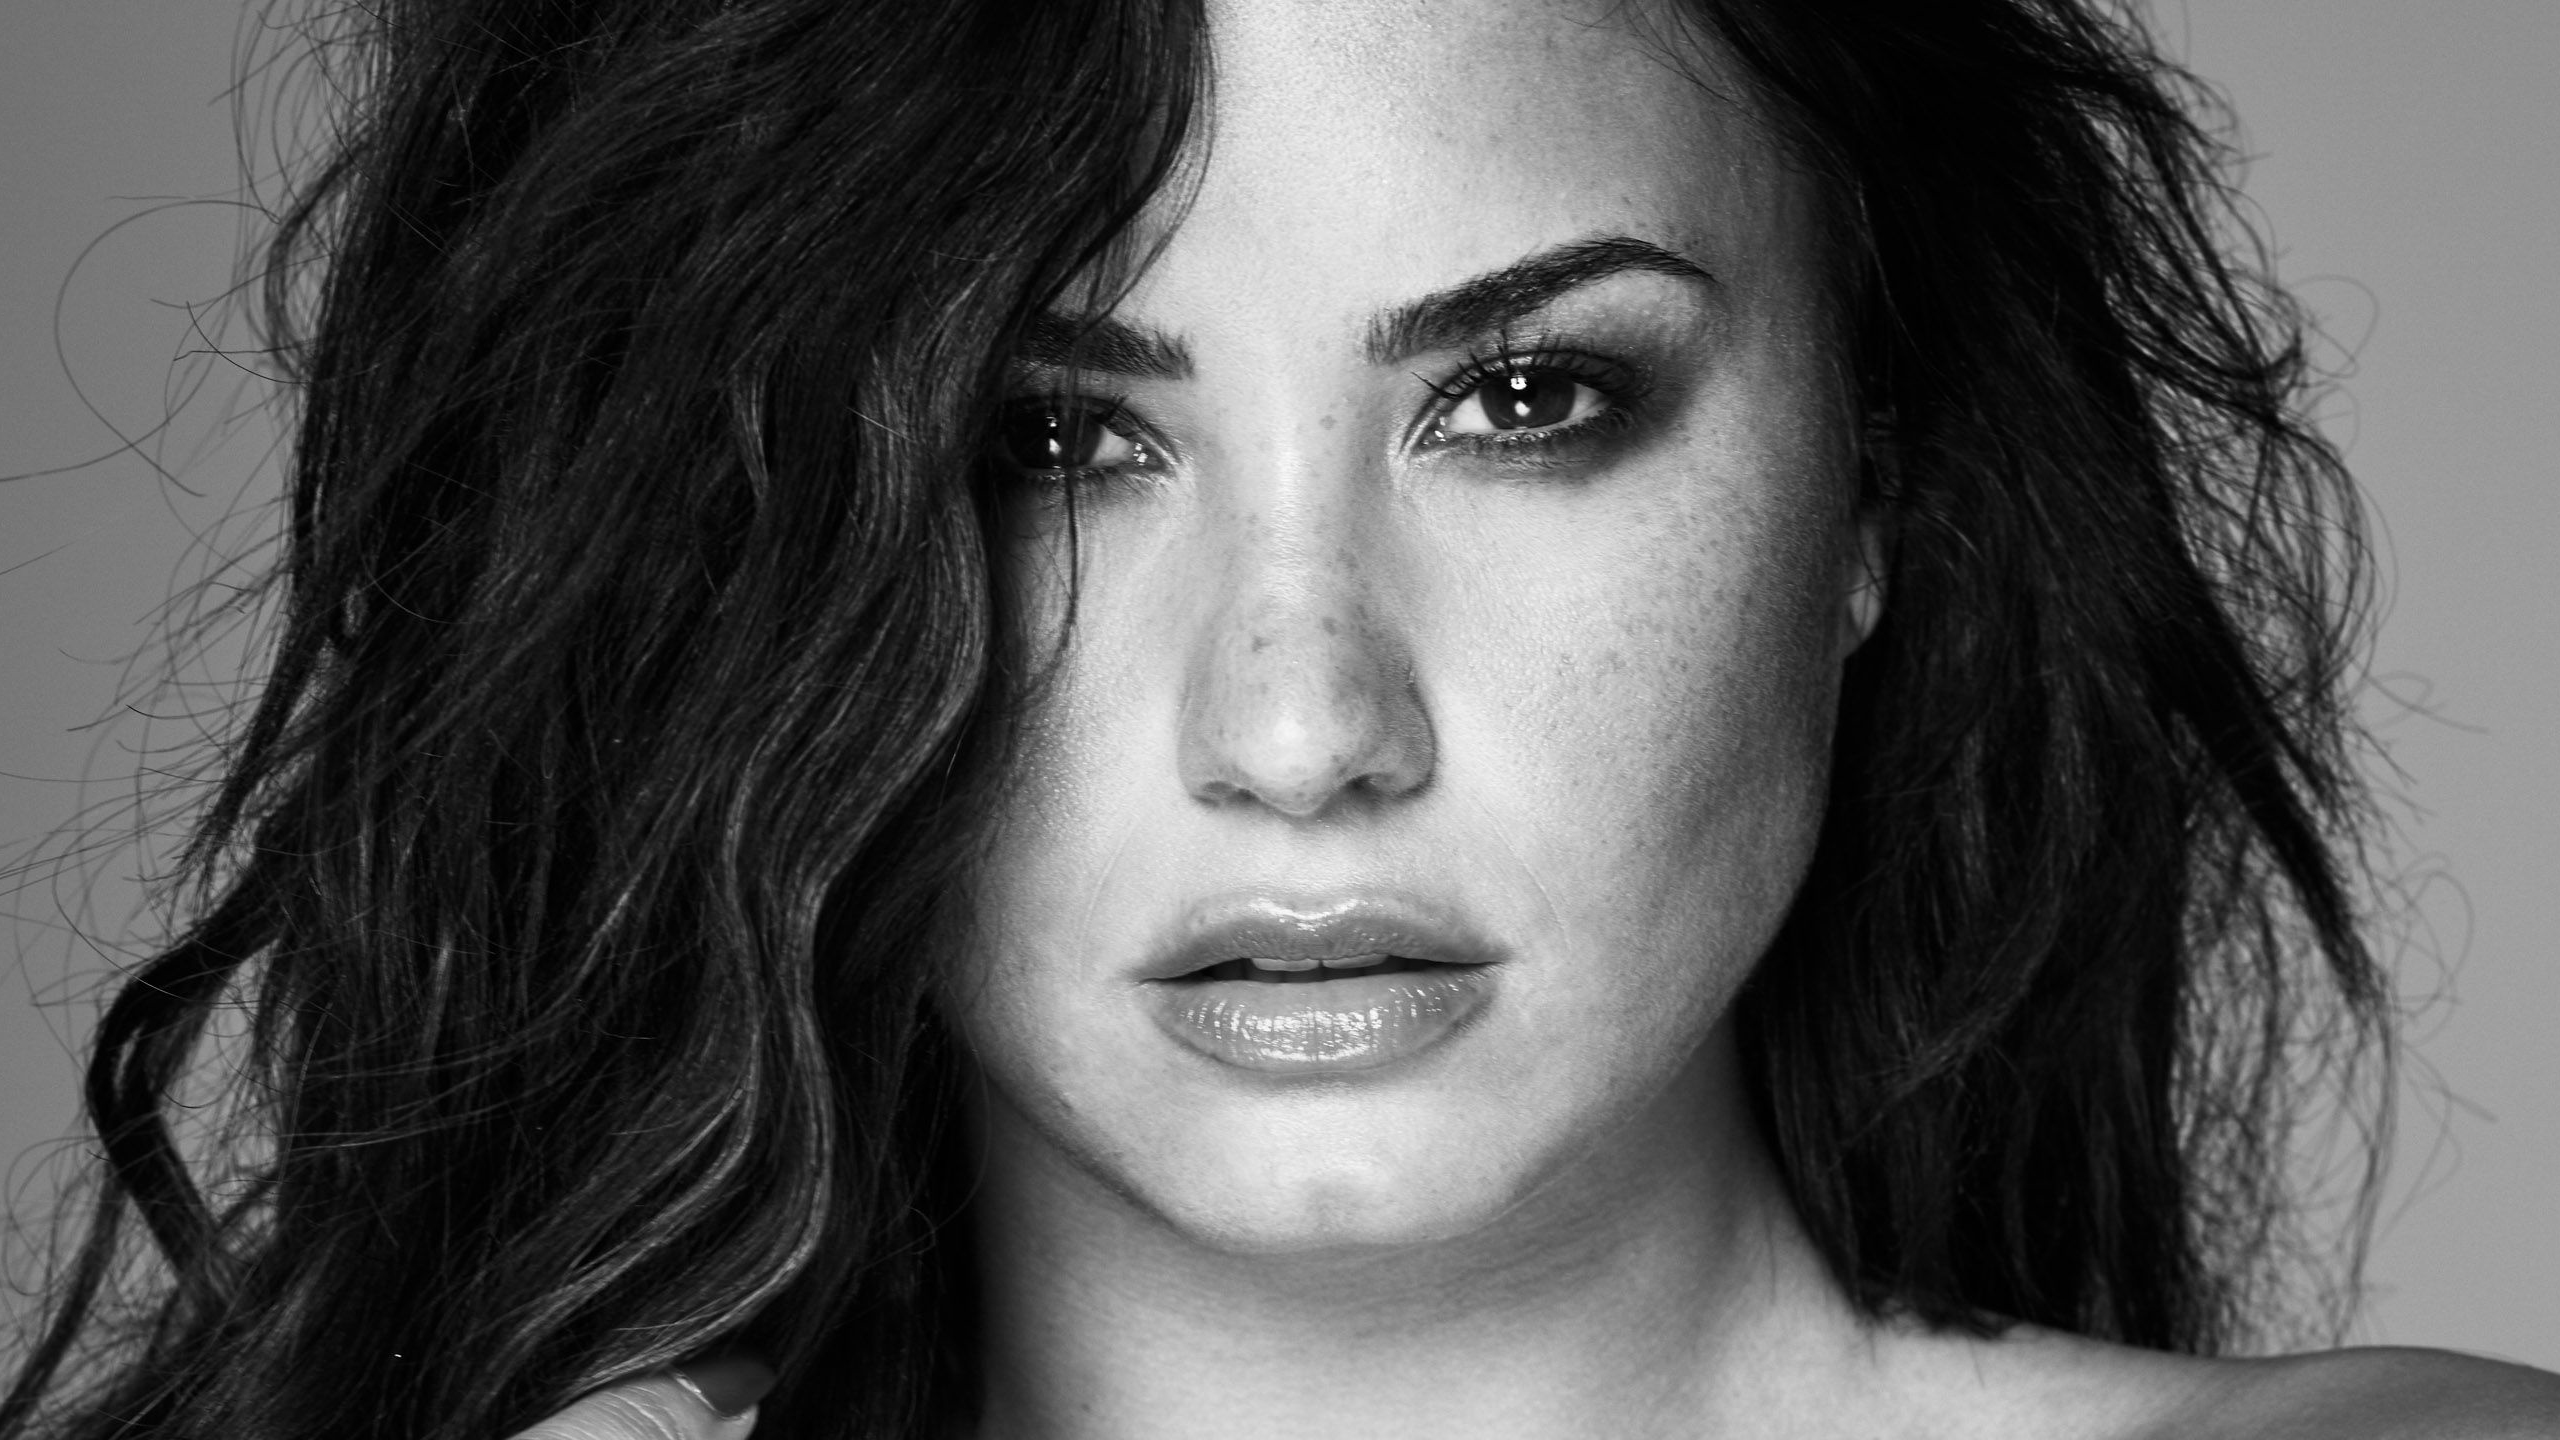 Demi Lovato Tell Me You Love Me HD Wallpapers